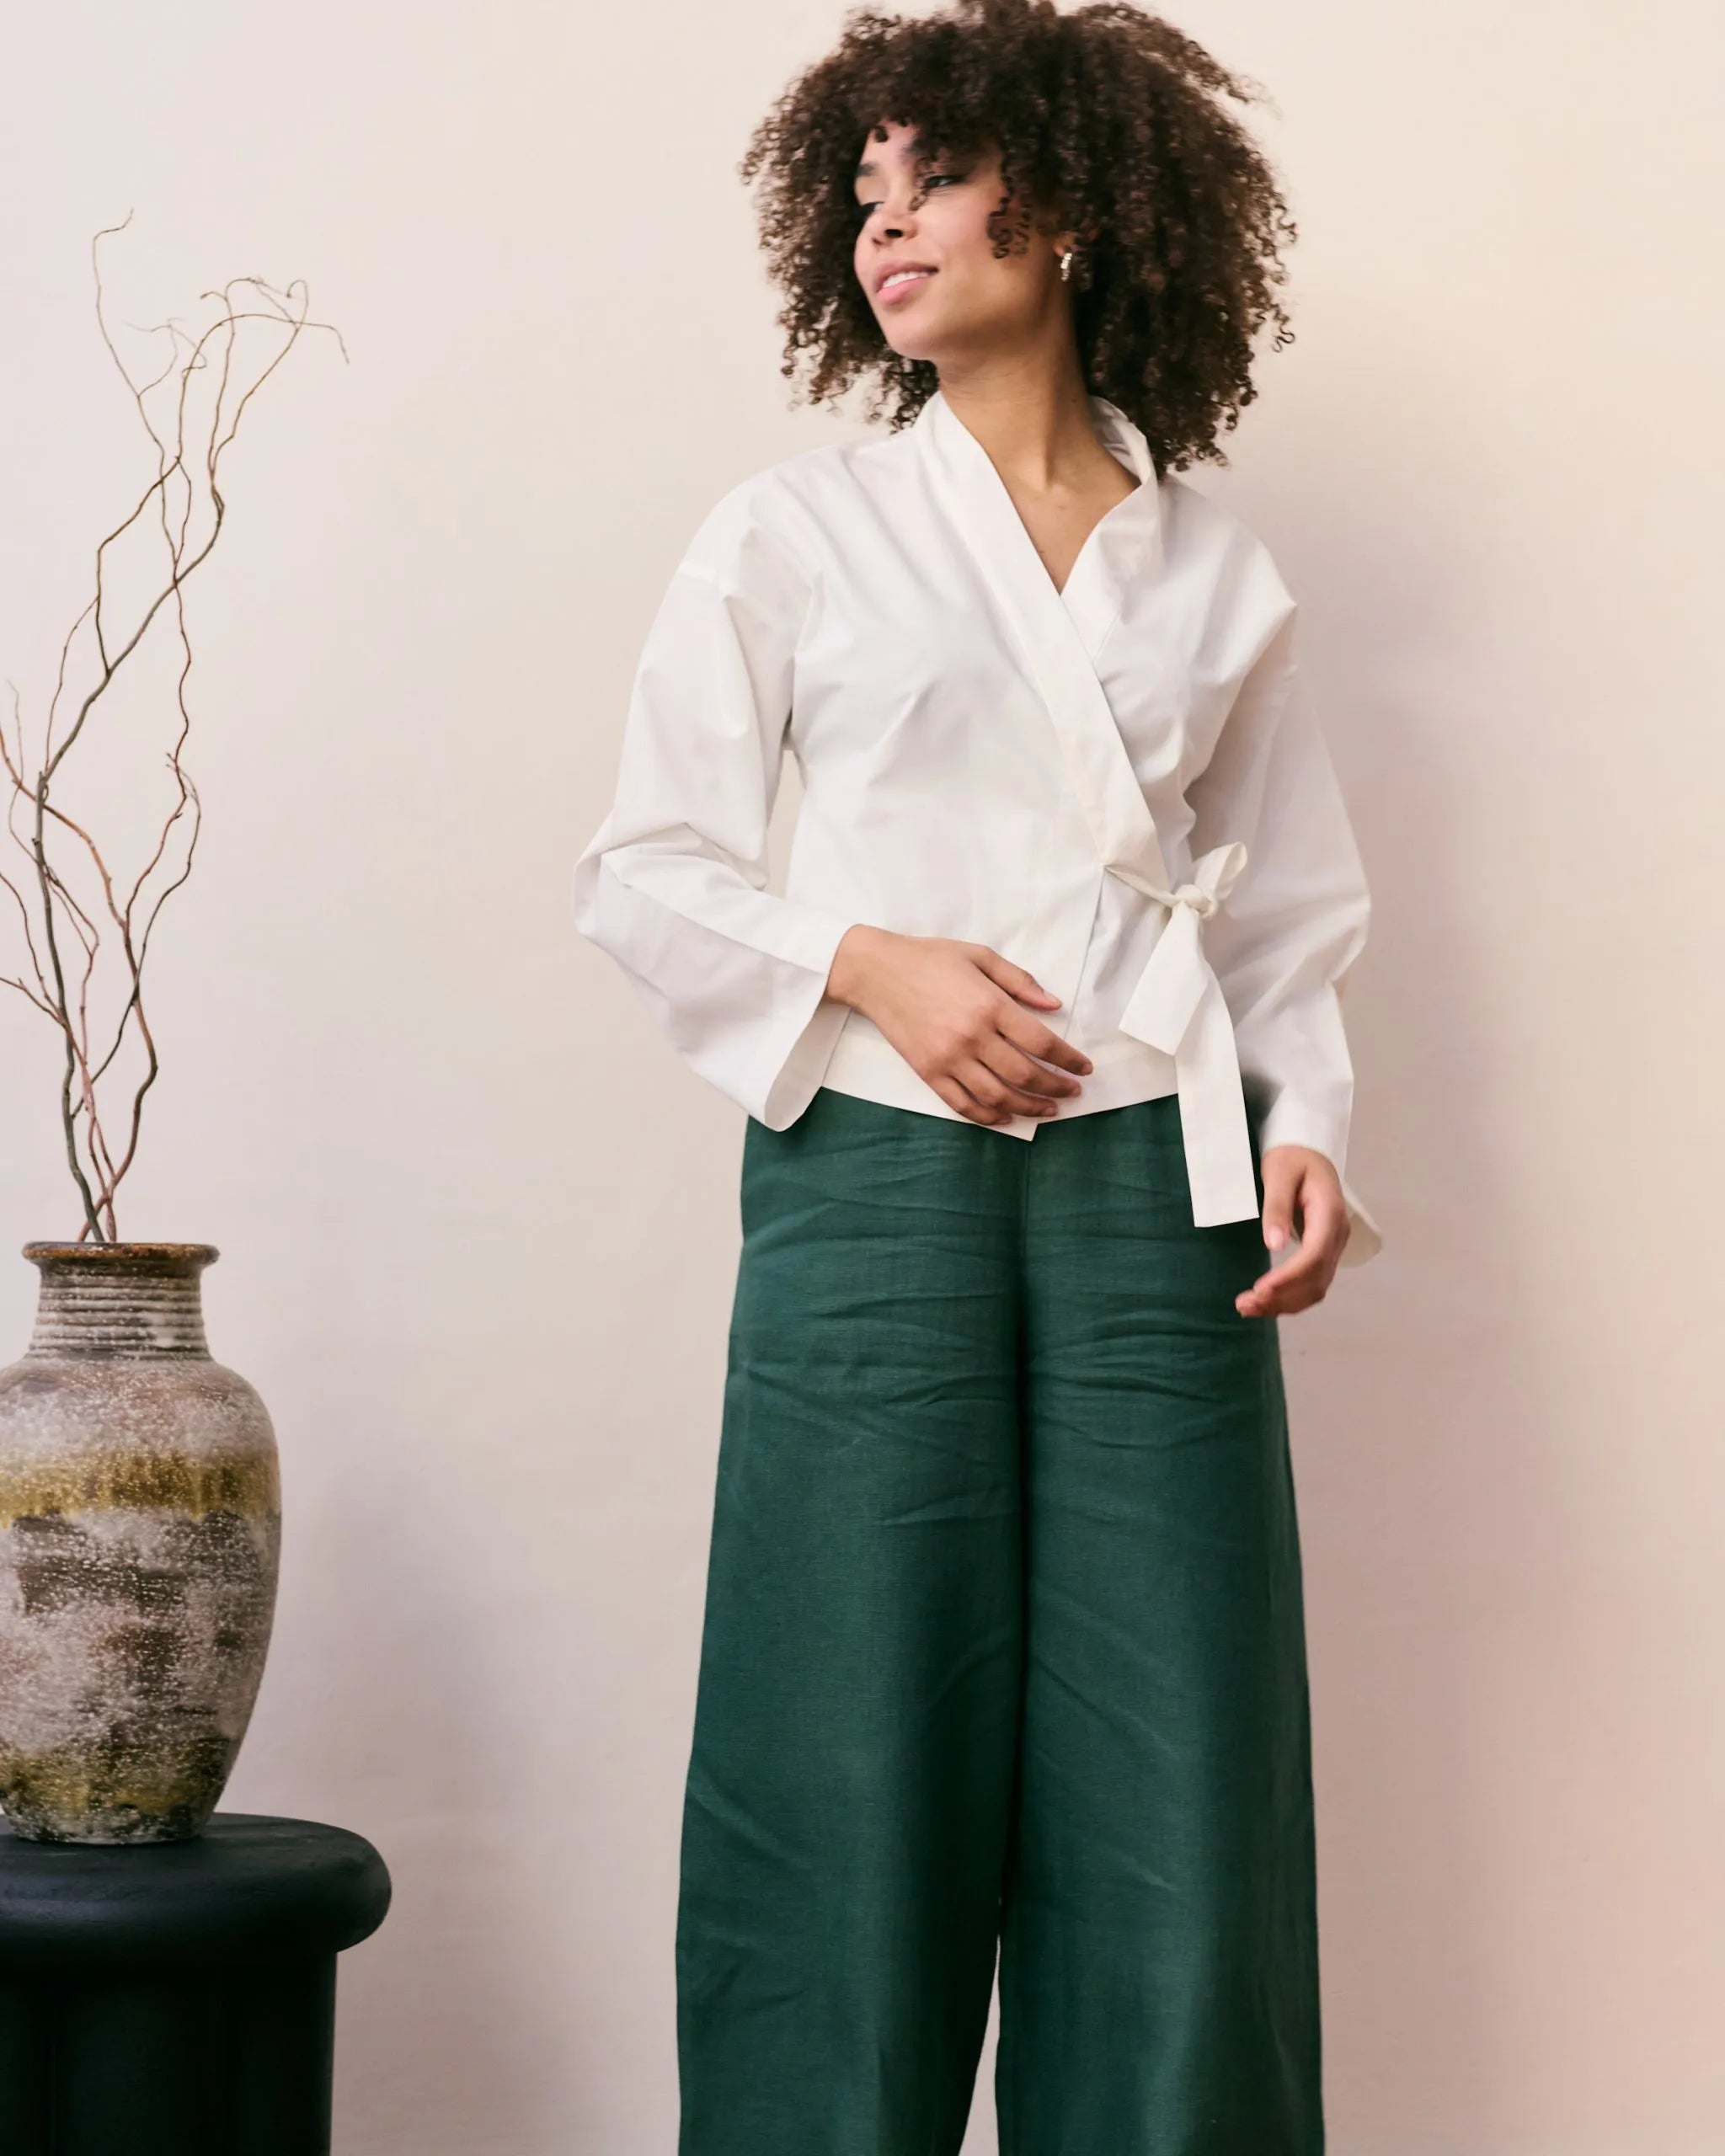 Off-white wrap blouse in 100% organic cotton and a green linen pants.